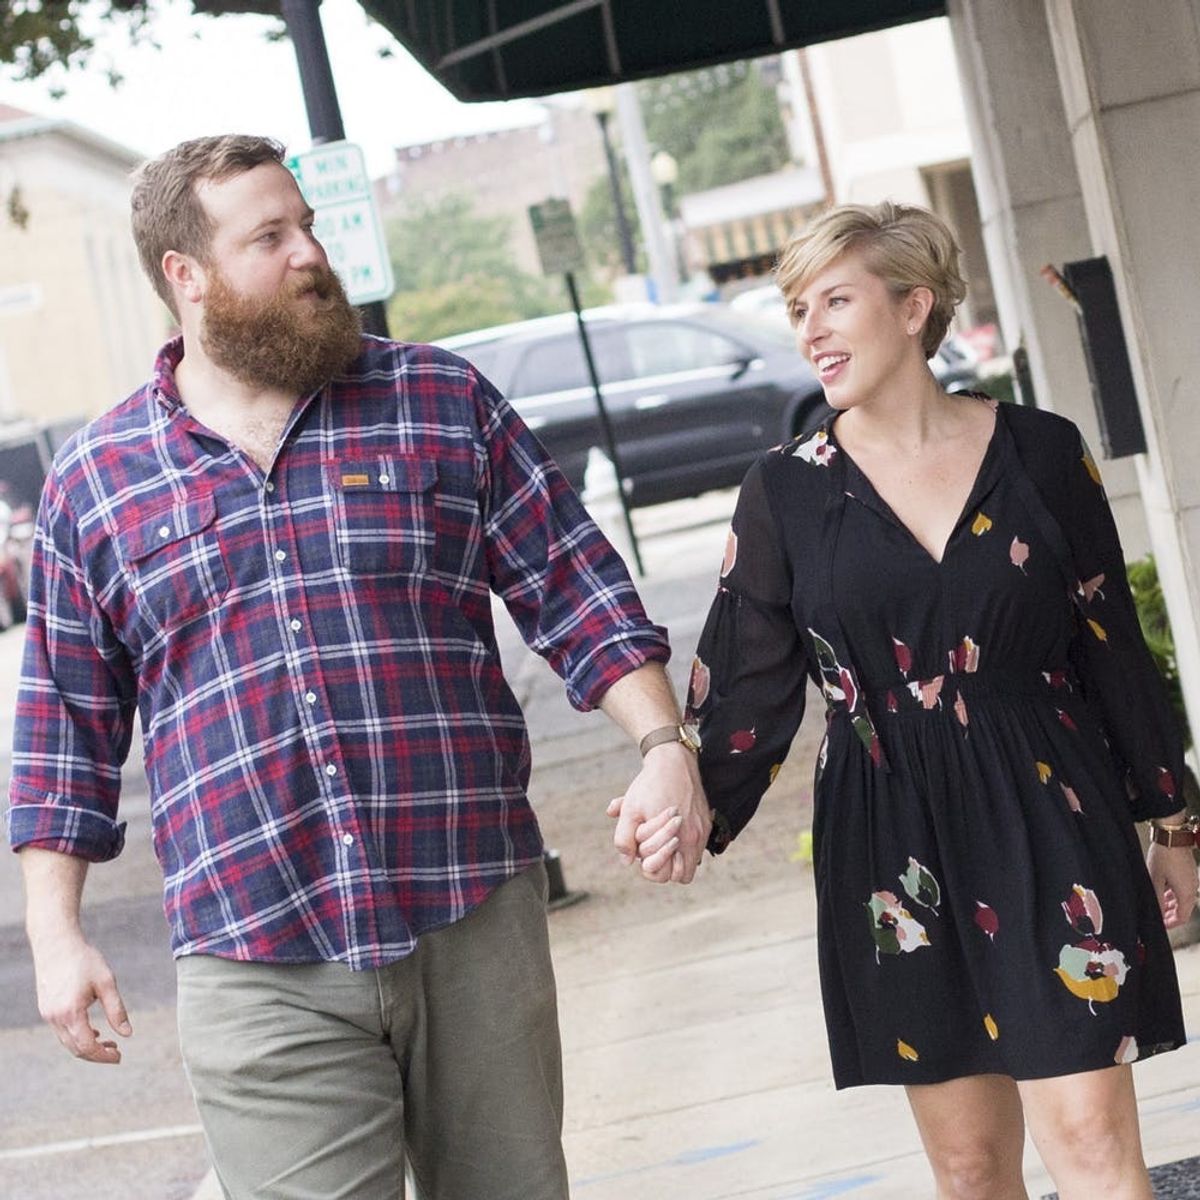 HGTV’s ‘Home Town’ Stars Ben and Erin Napier Welcome a Baby Girl! See the Sweet First Snaps